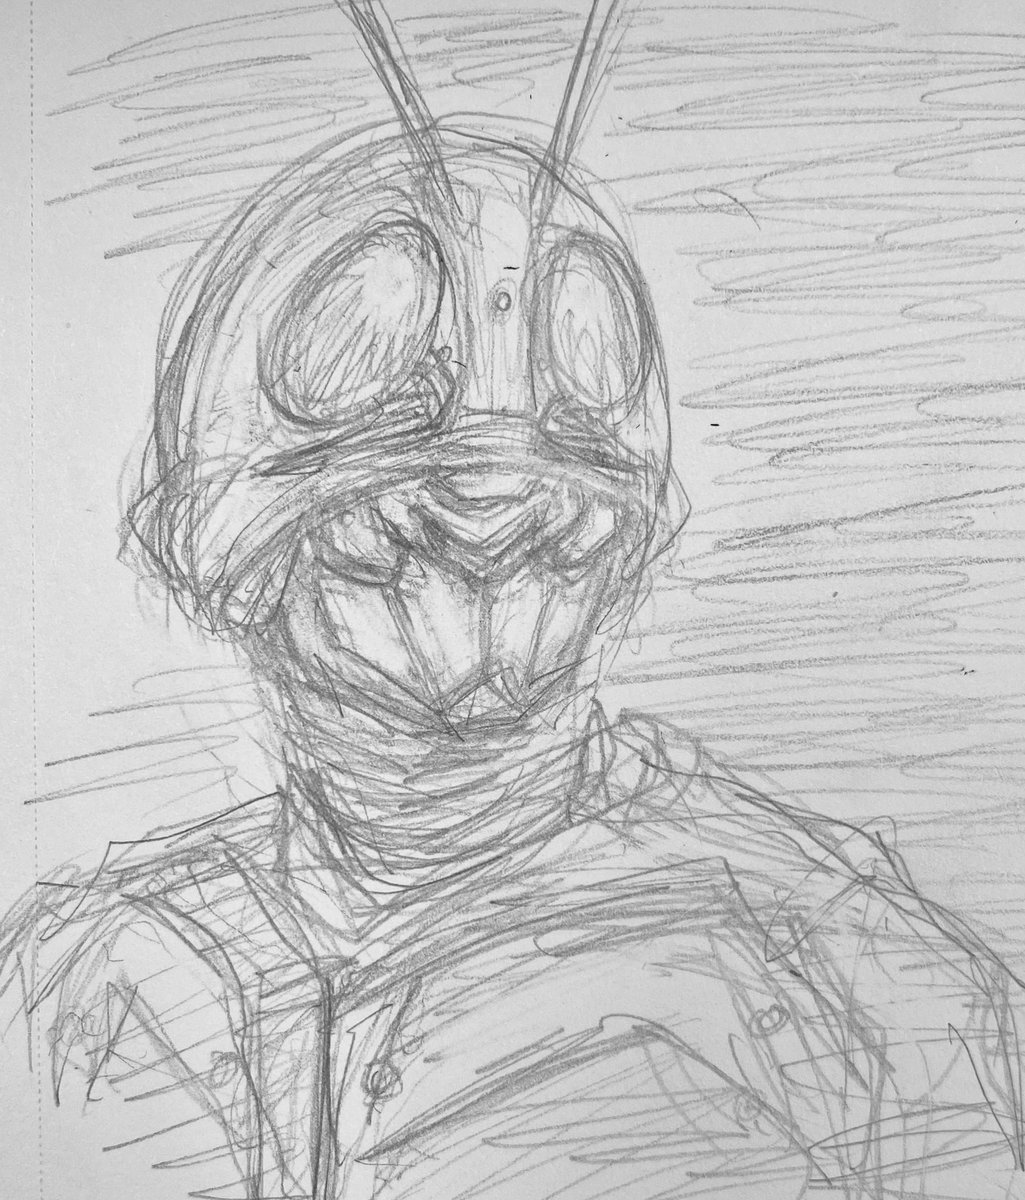 Slow day in class so I ended up doodling Kamen Rider again 